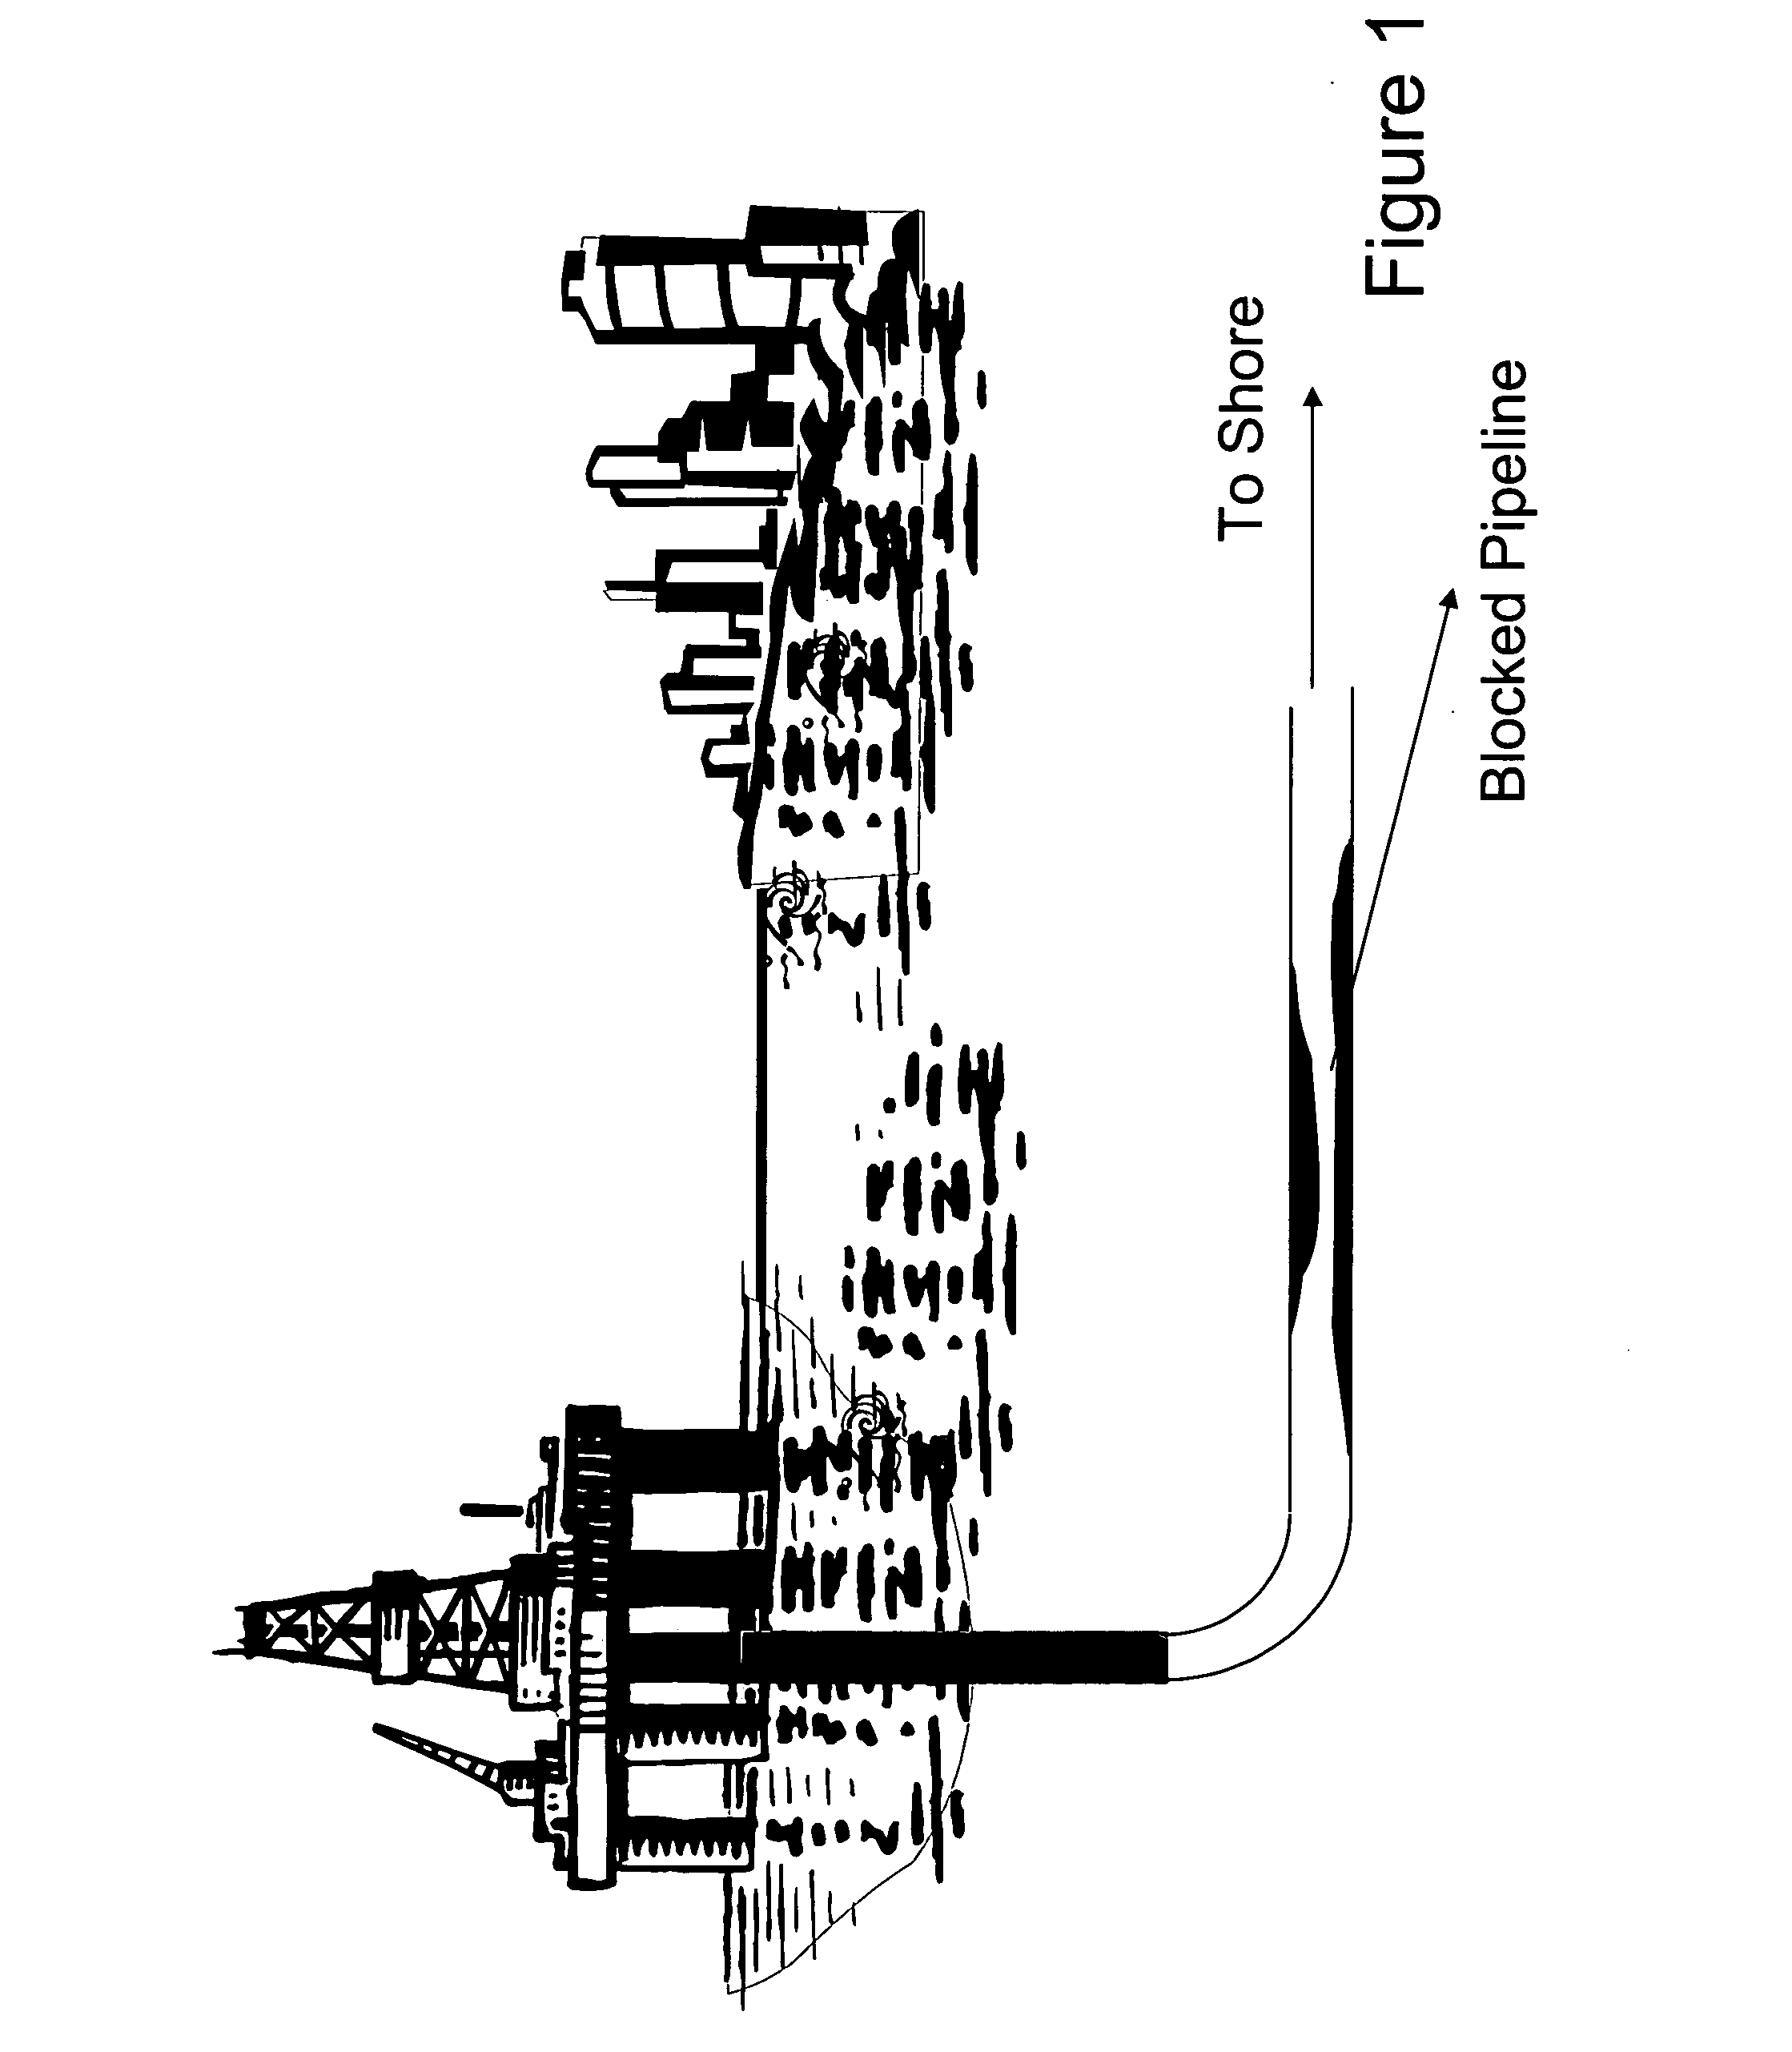 Methods and compositions for thermally treating a conduit used for hydrocarbon production or transmission to help remove paraffin wax buildup